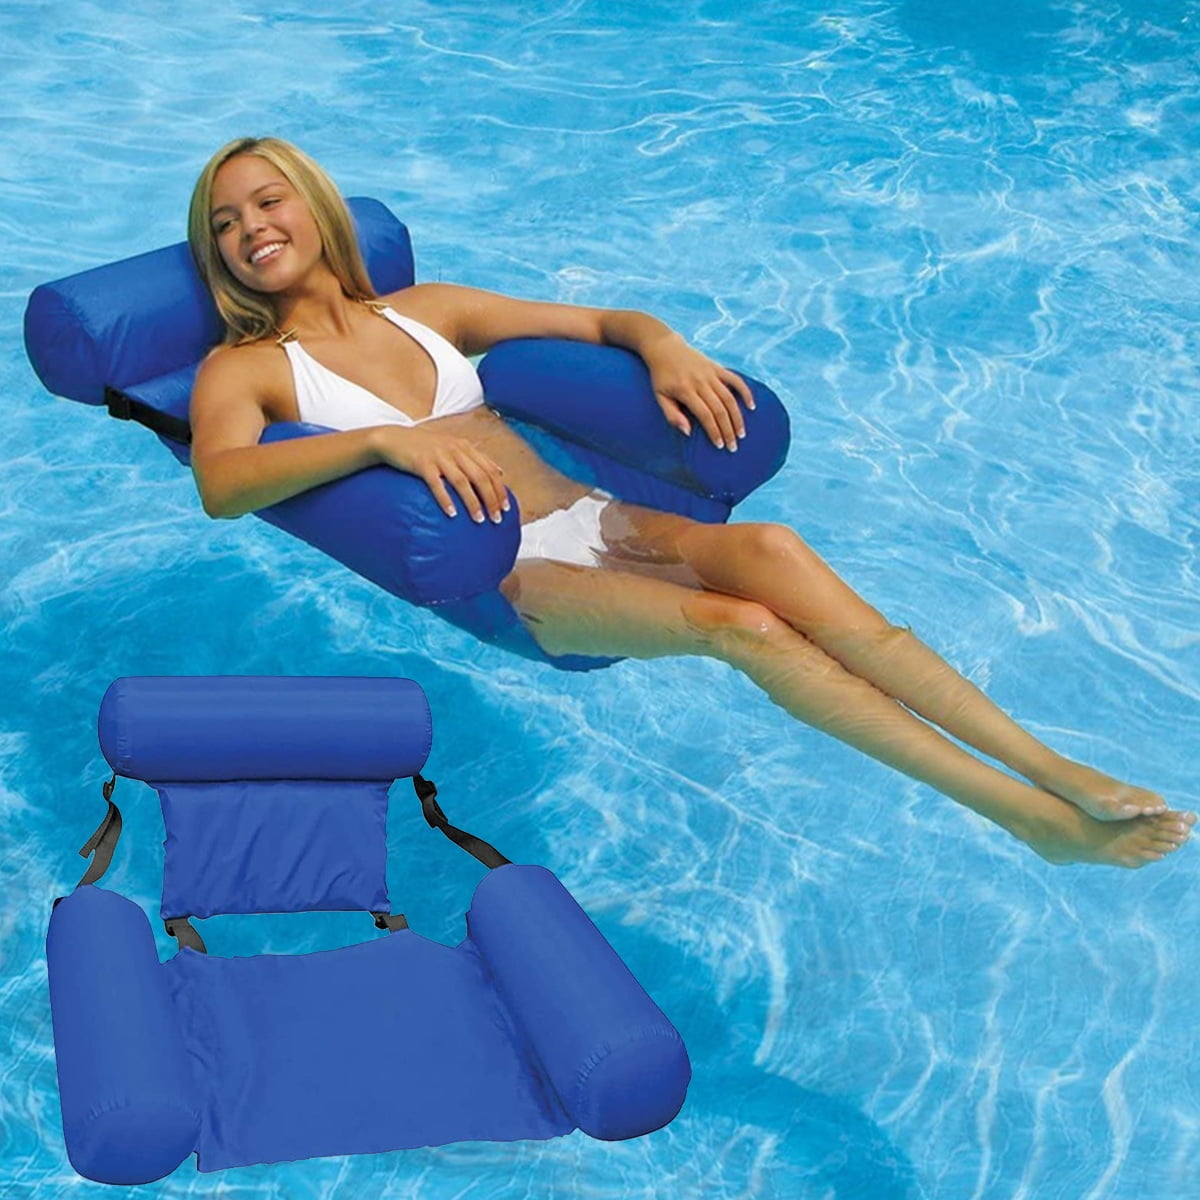 Heavy Duty Ocean NOODLE CHAIR Water Pool Thick Foam Oversize Chair Blue NEW 9125 